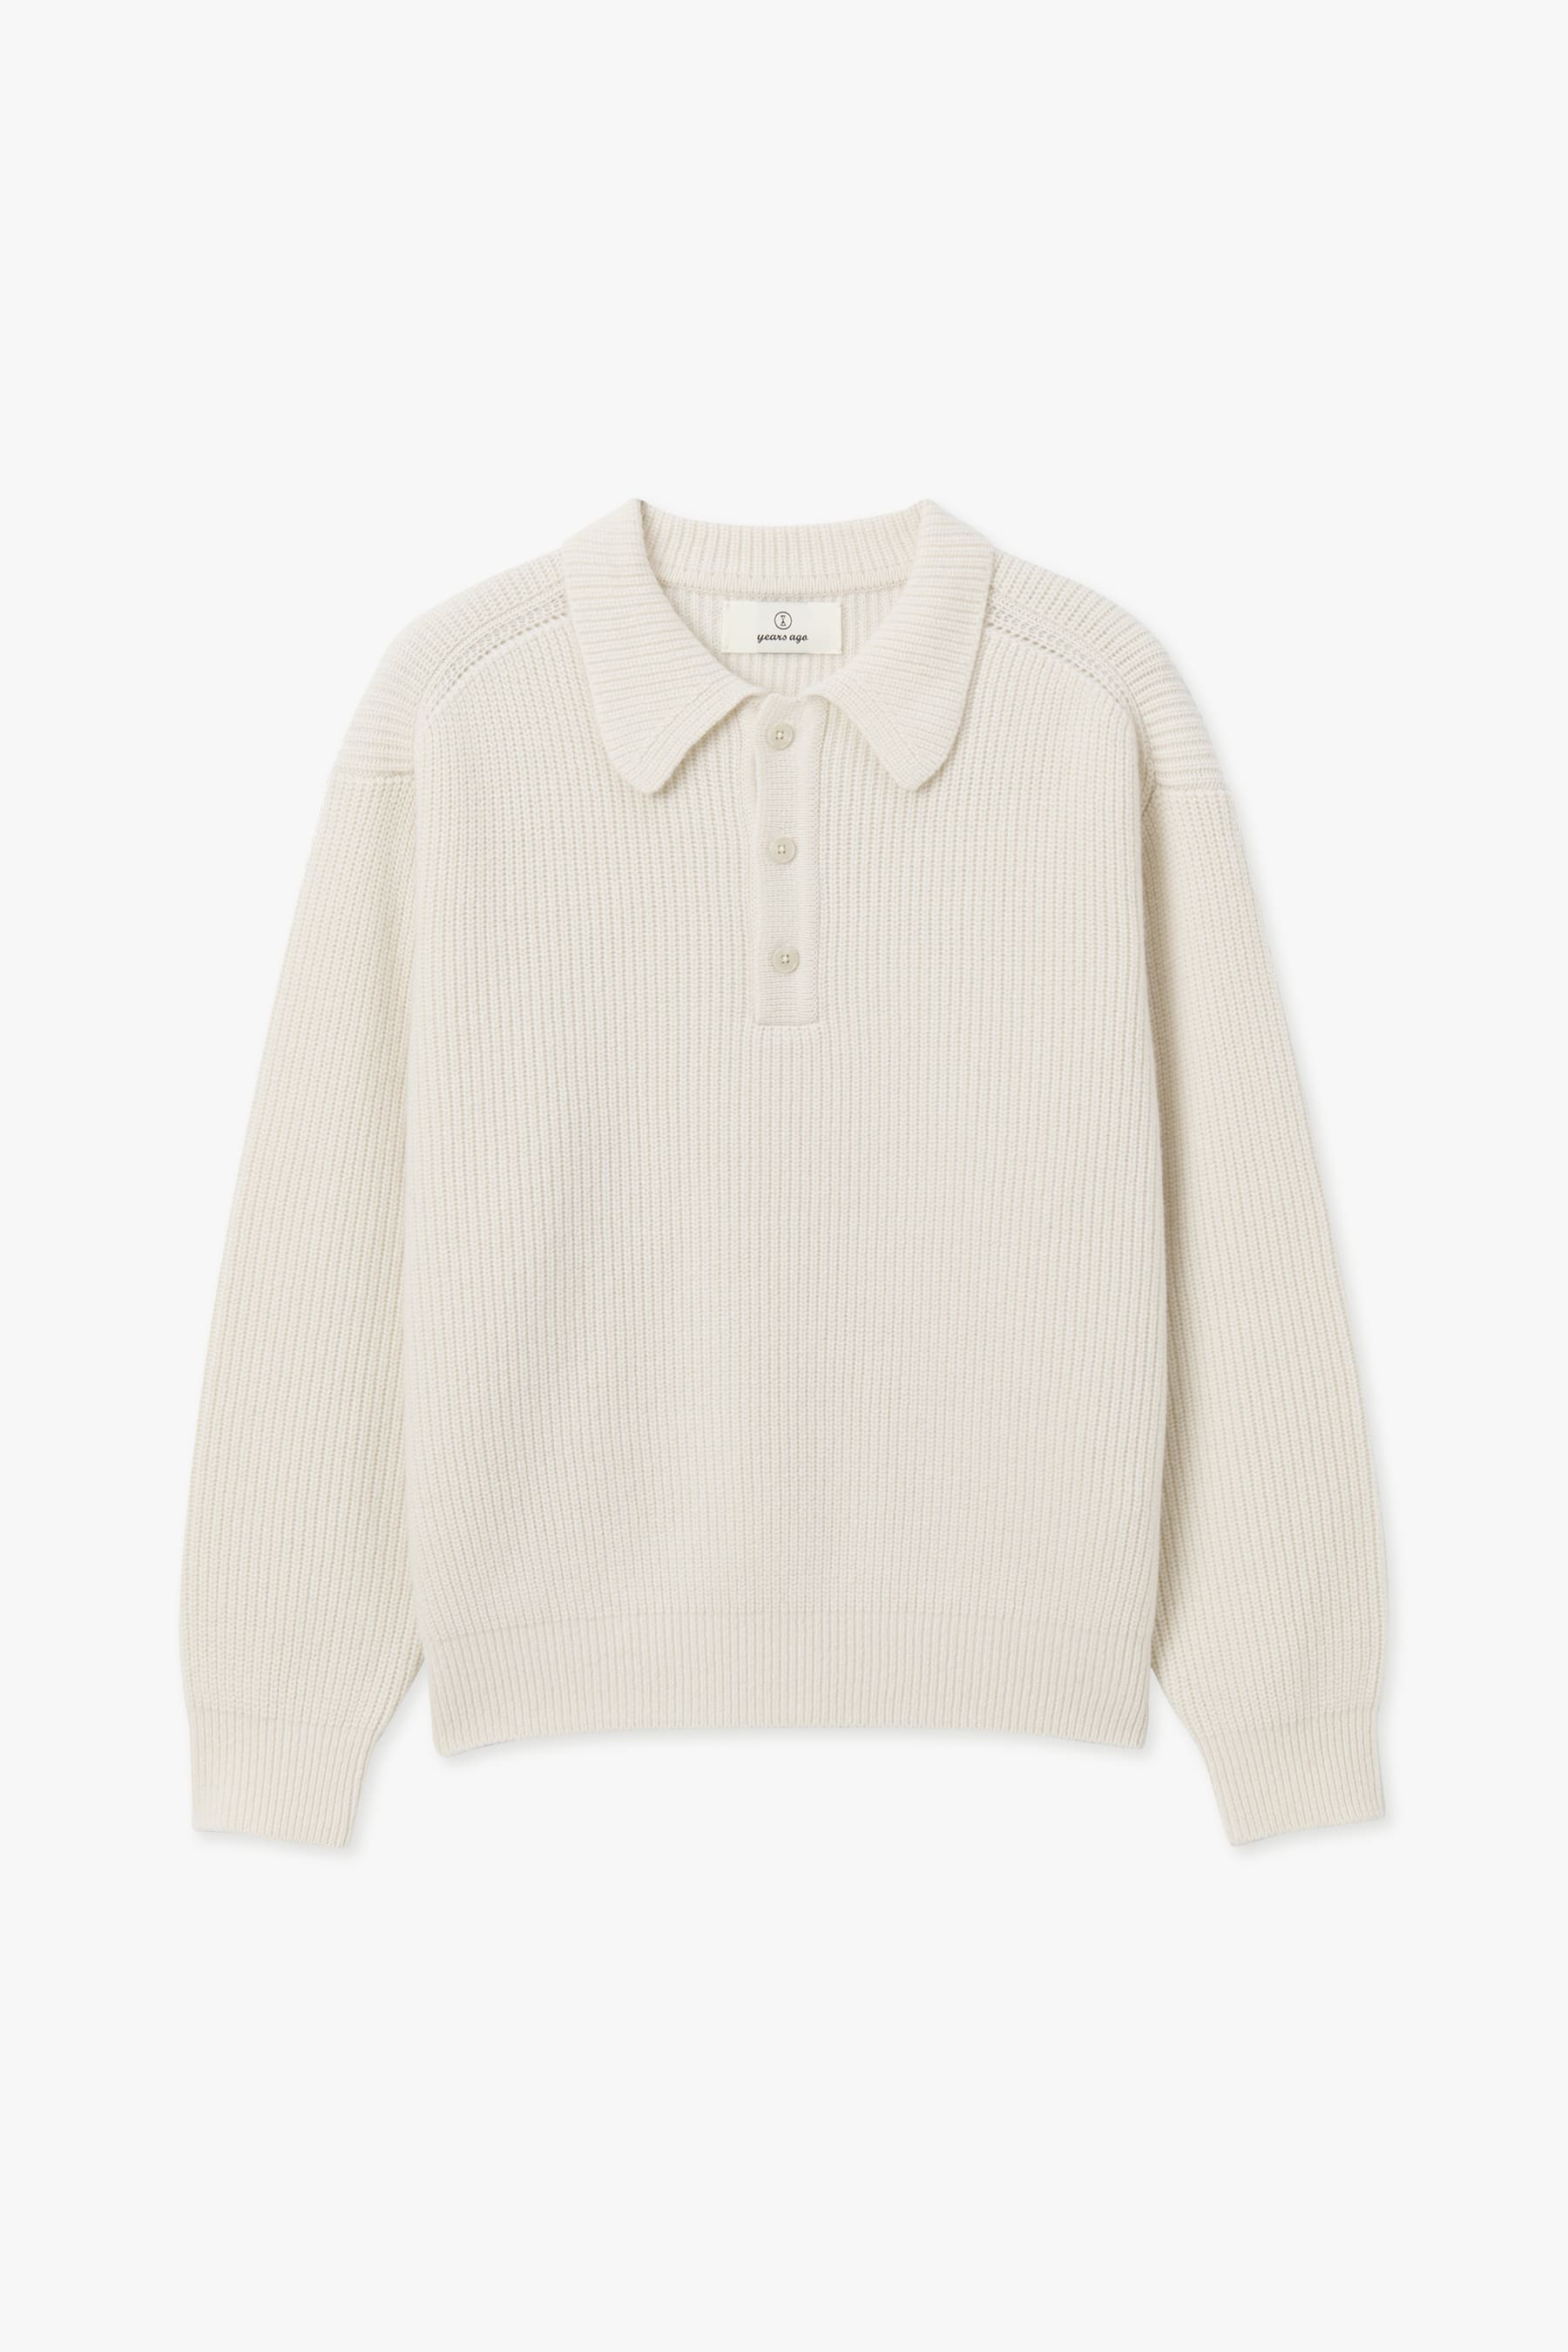 IVORY ROVER WOOL KNIT COLLAR SHIRT